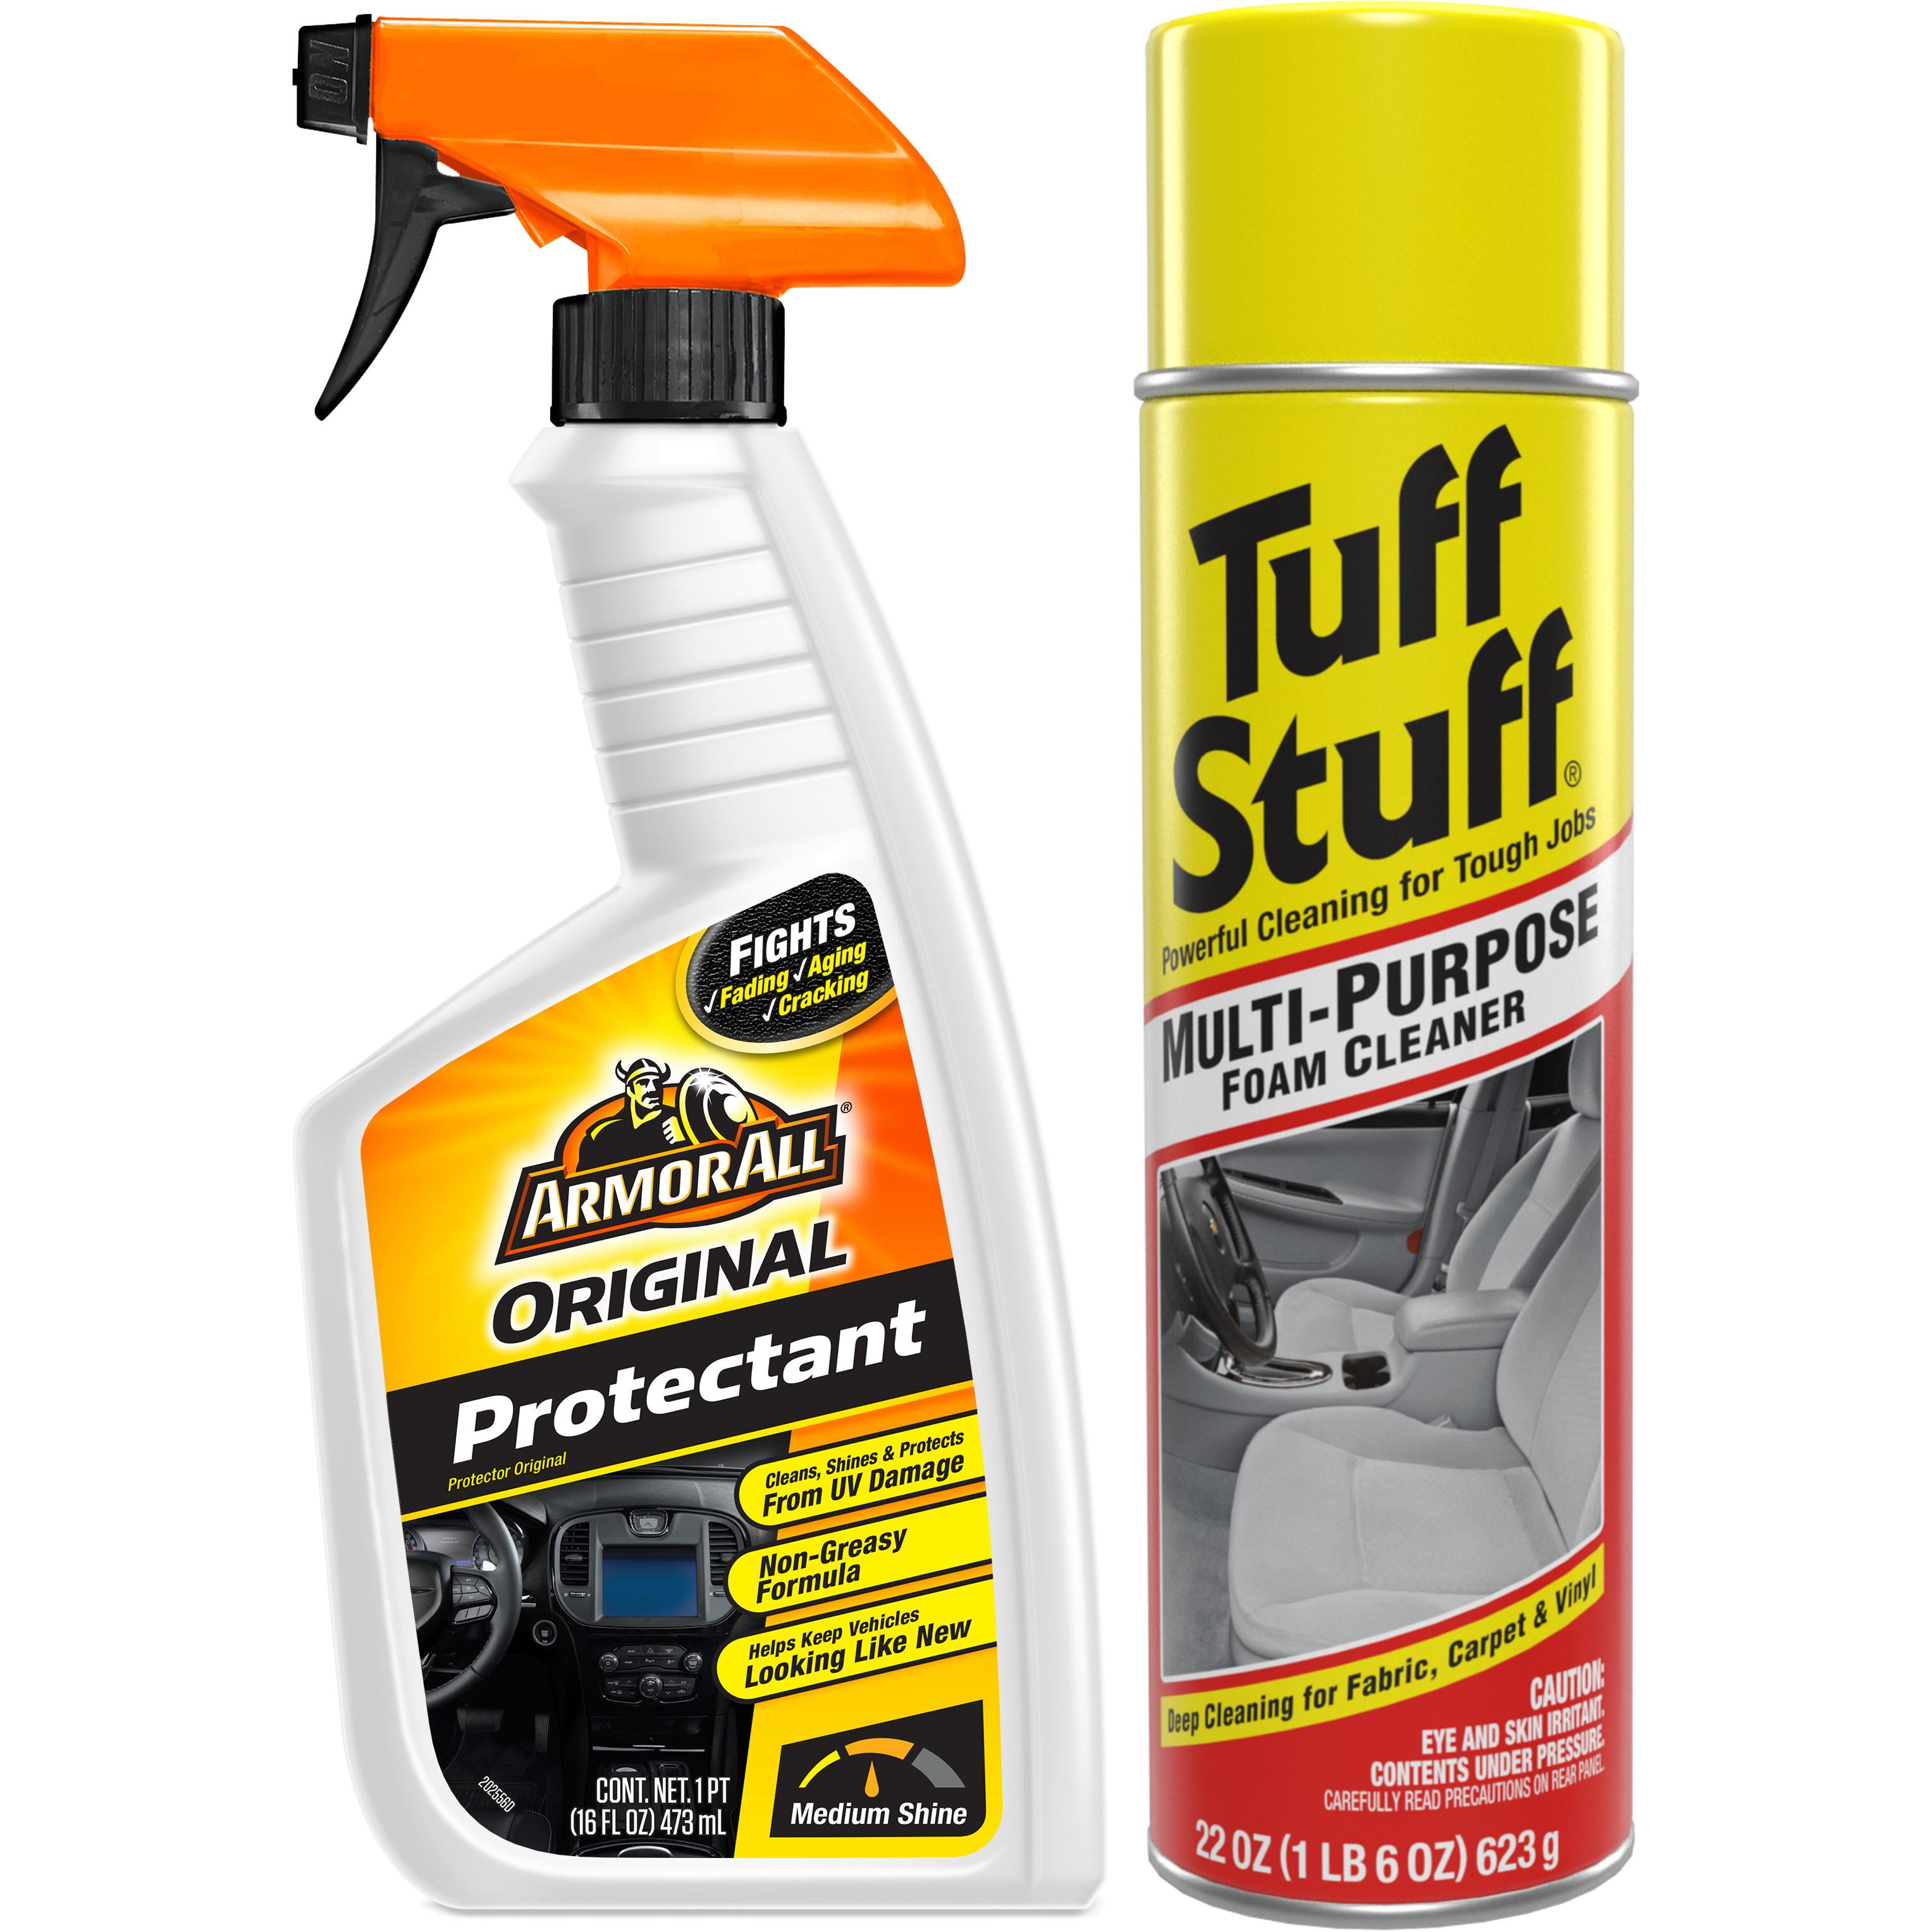 Auto Care Starter Kit With Armor All Original Protectant and Tuff Stuff  Cleaner- SAVE 10%